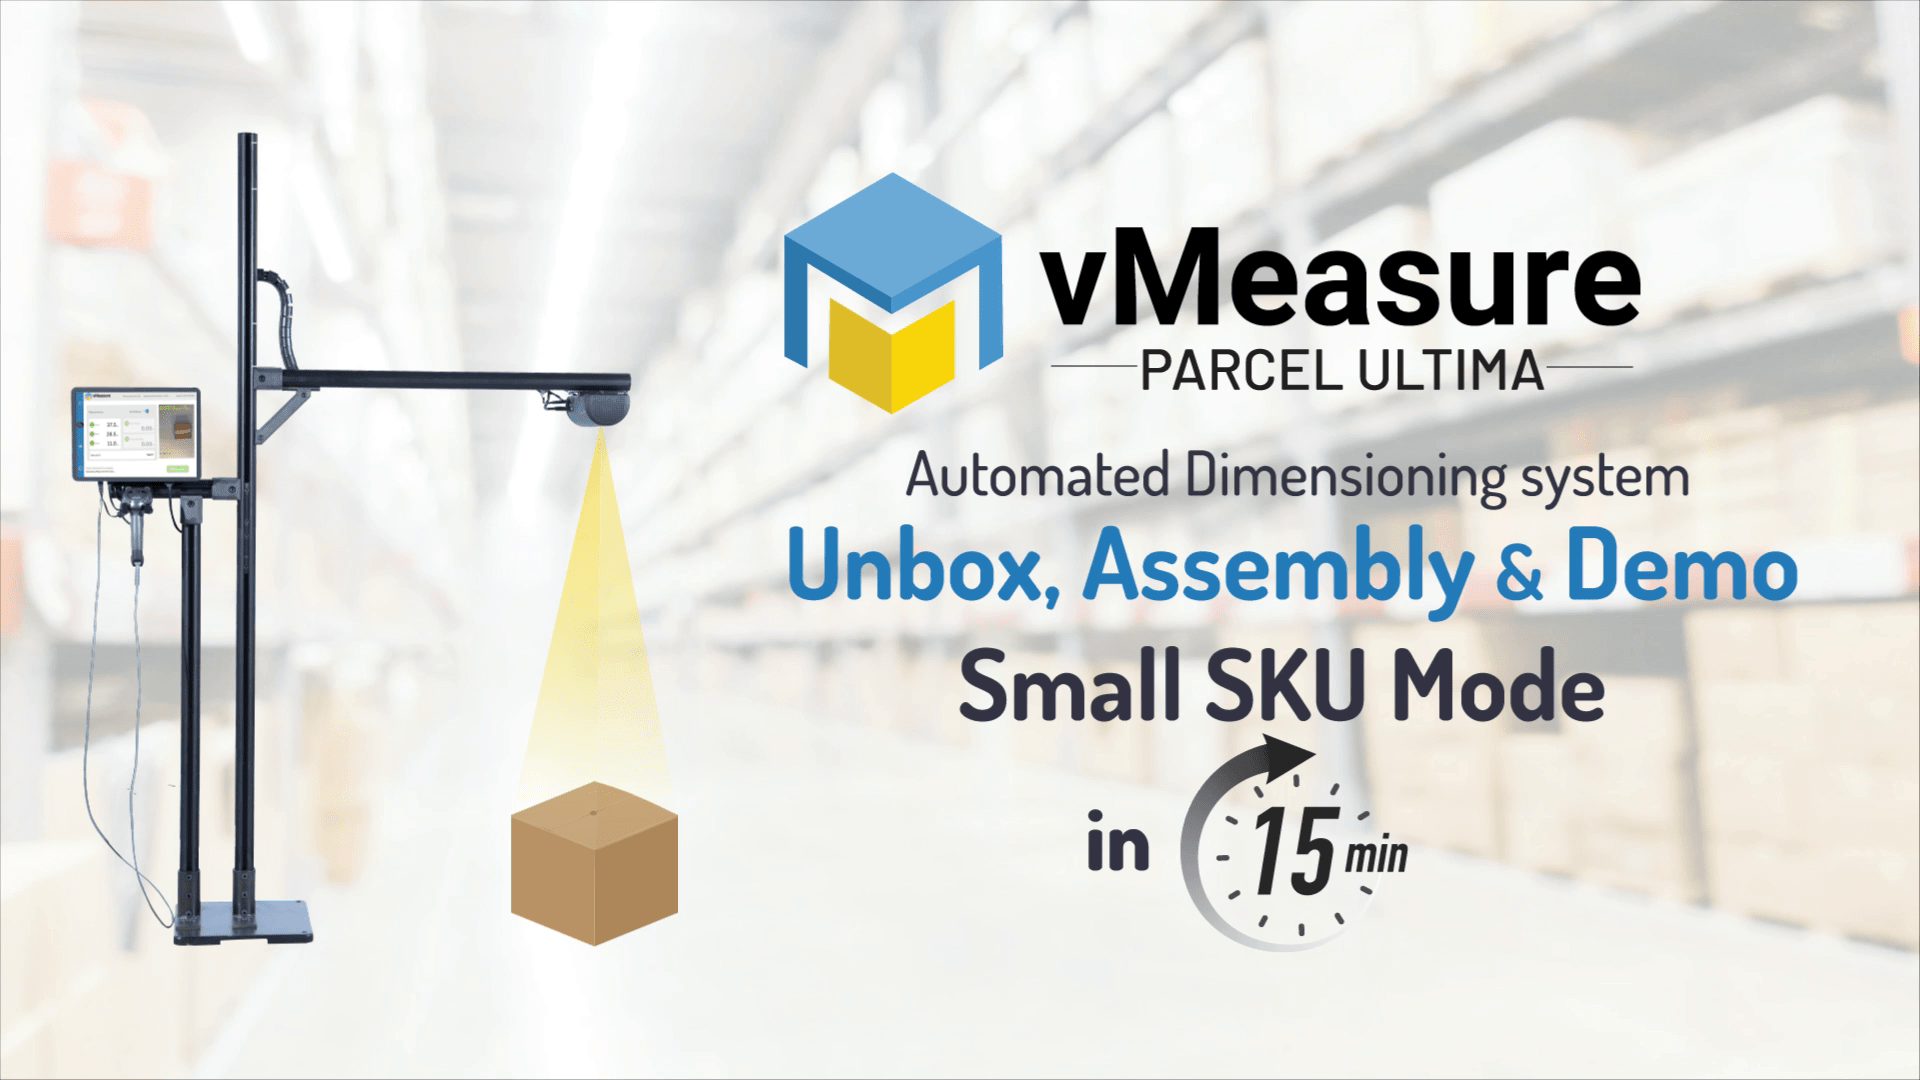 vMeasure Parcel Ultima Gold - Small SKU Mode without weighing scale